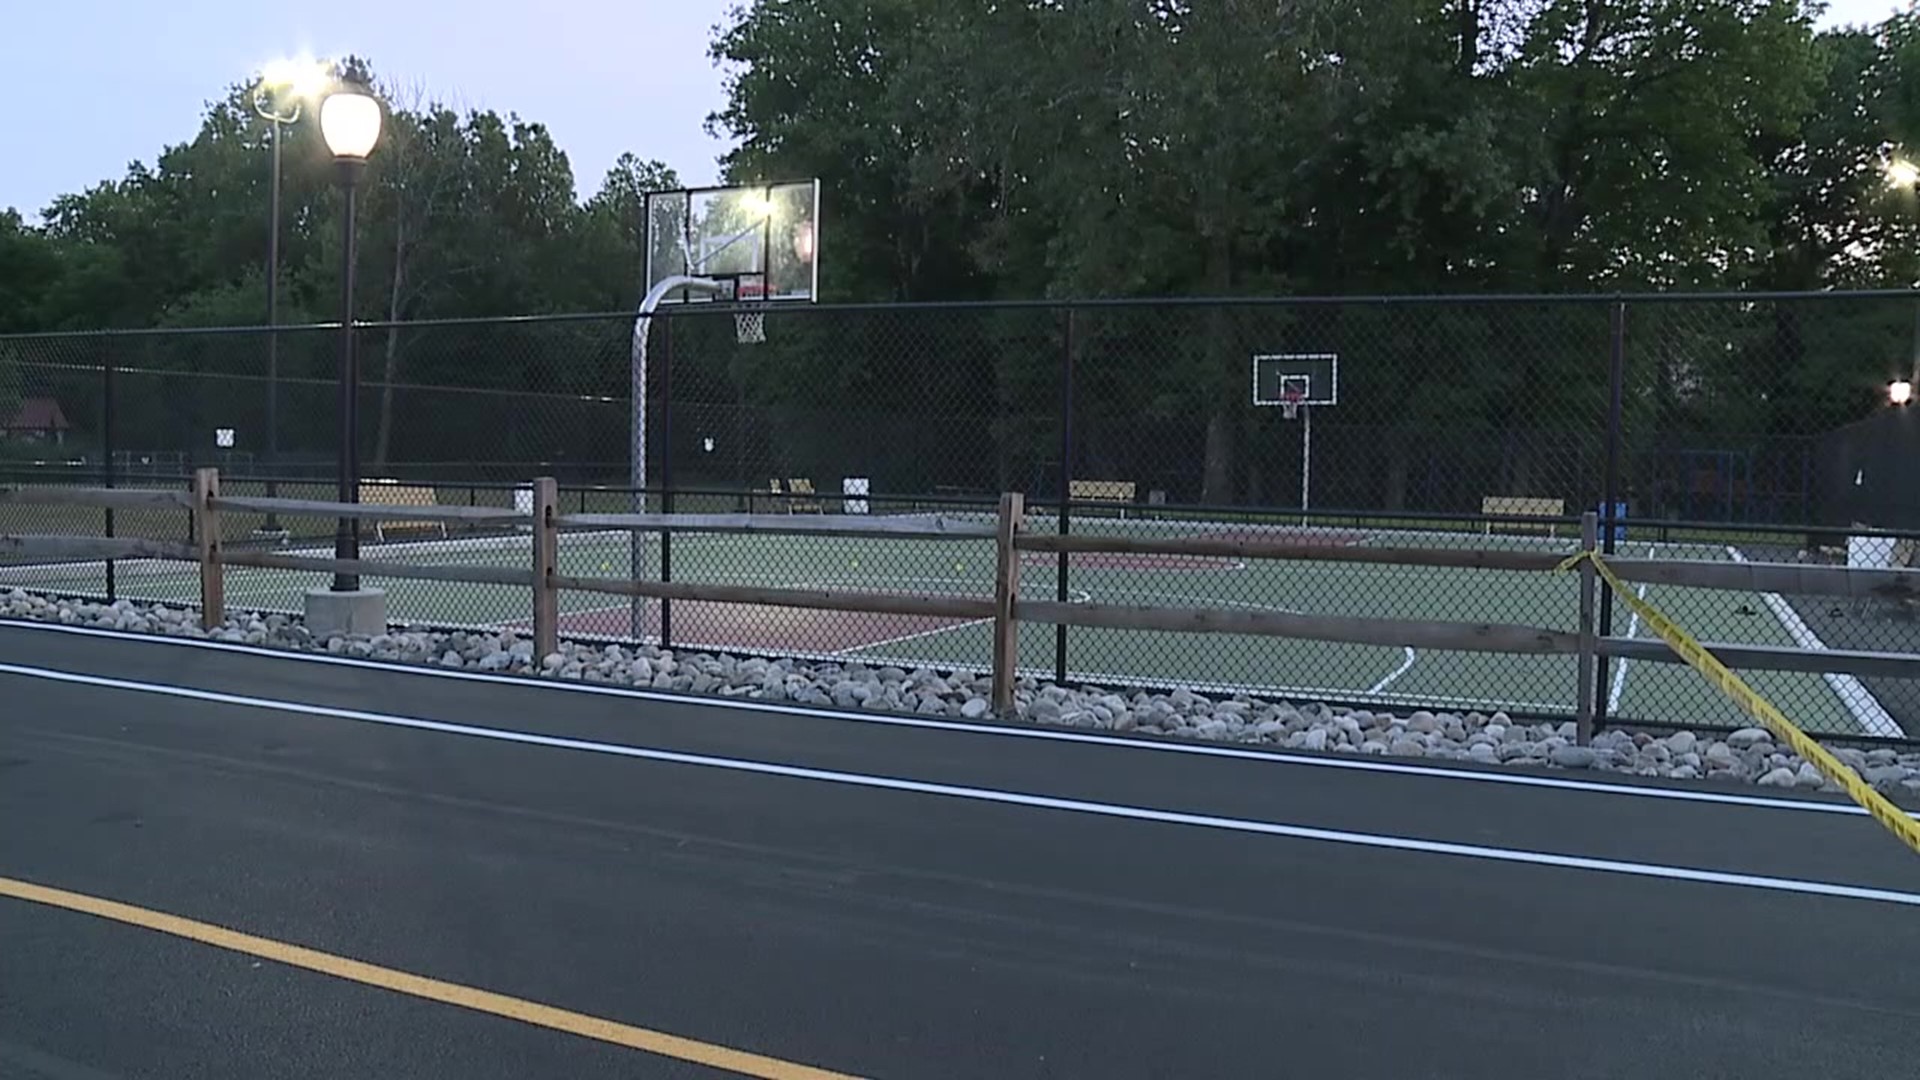 Police say one person was shot after an altercation on the basketball court at TLC Park in Pocono Township.